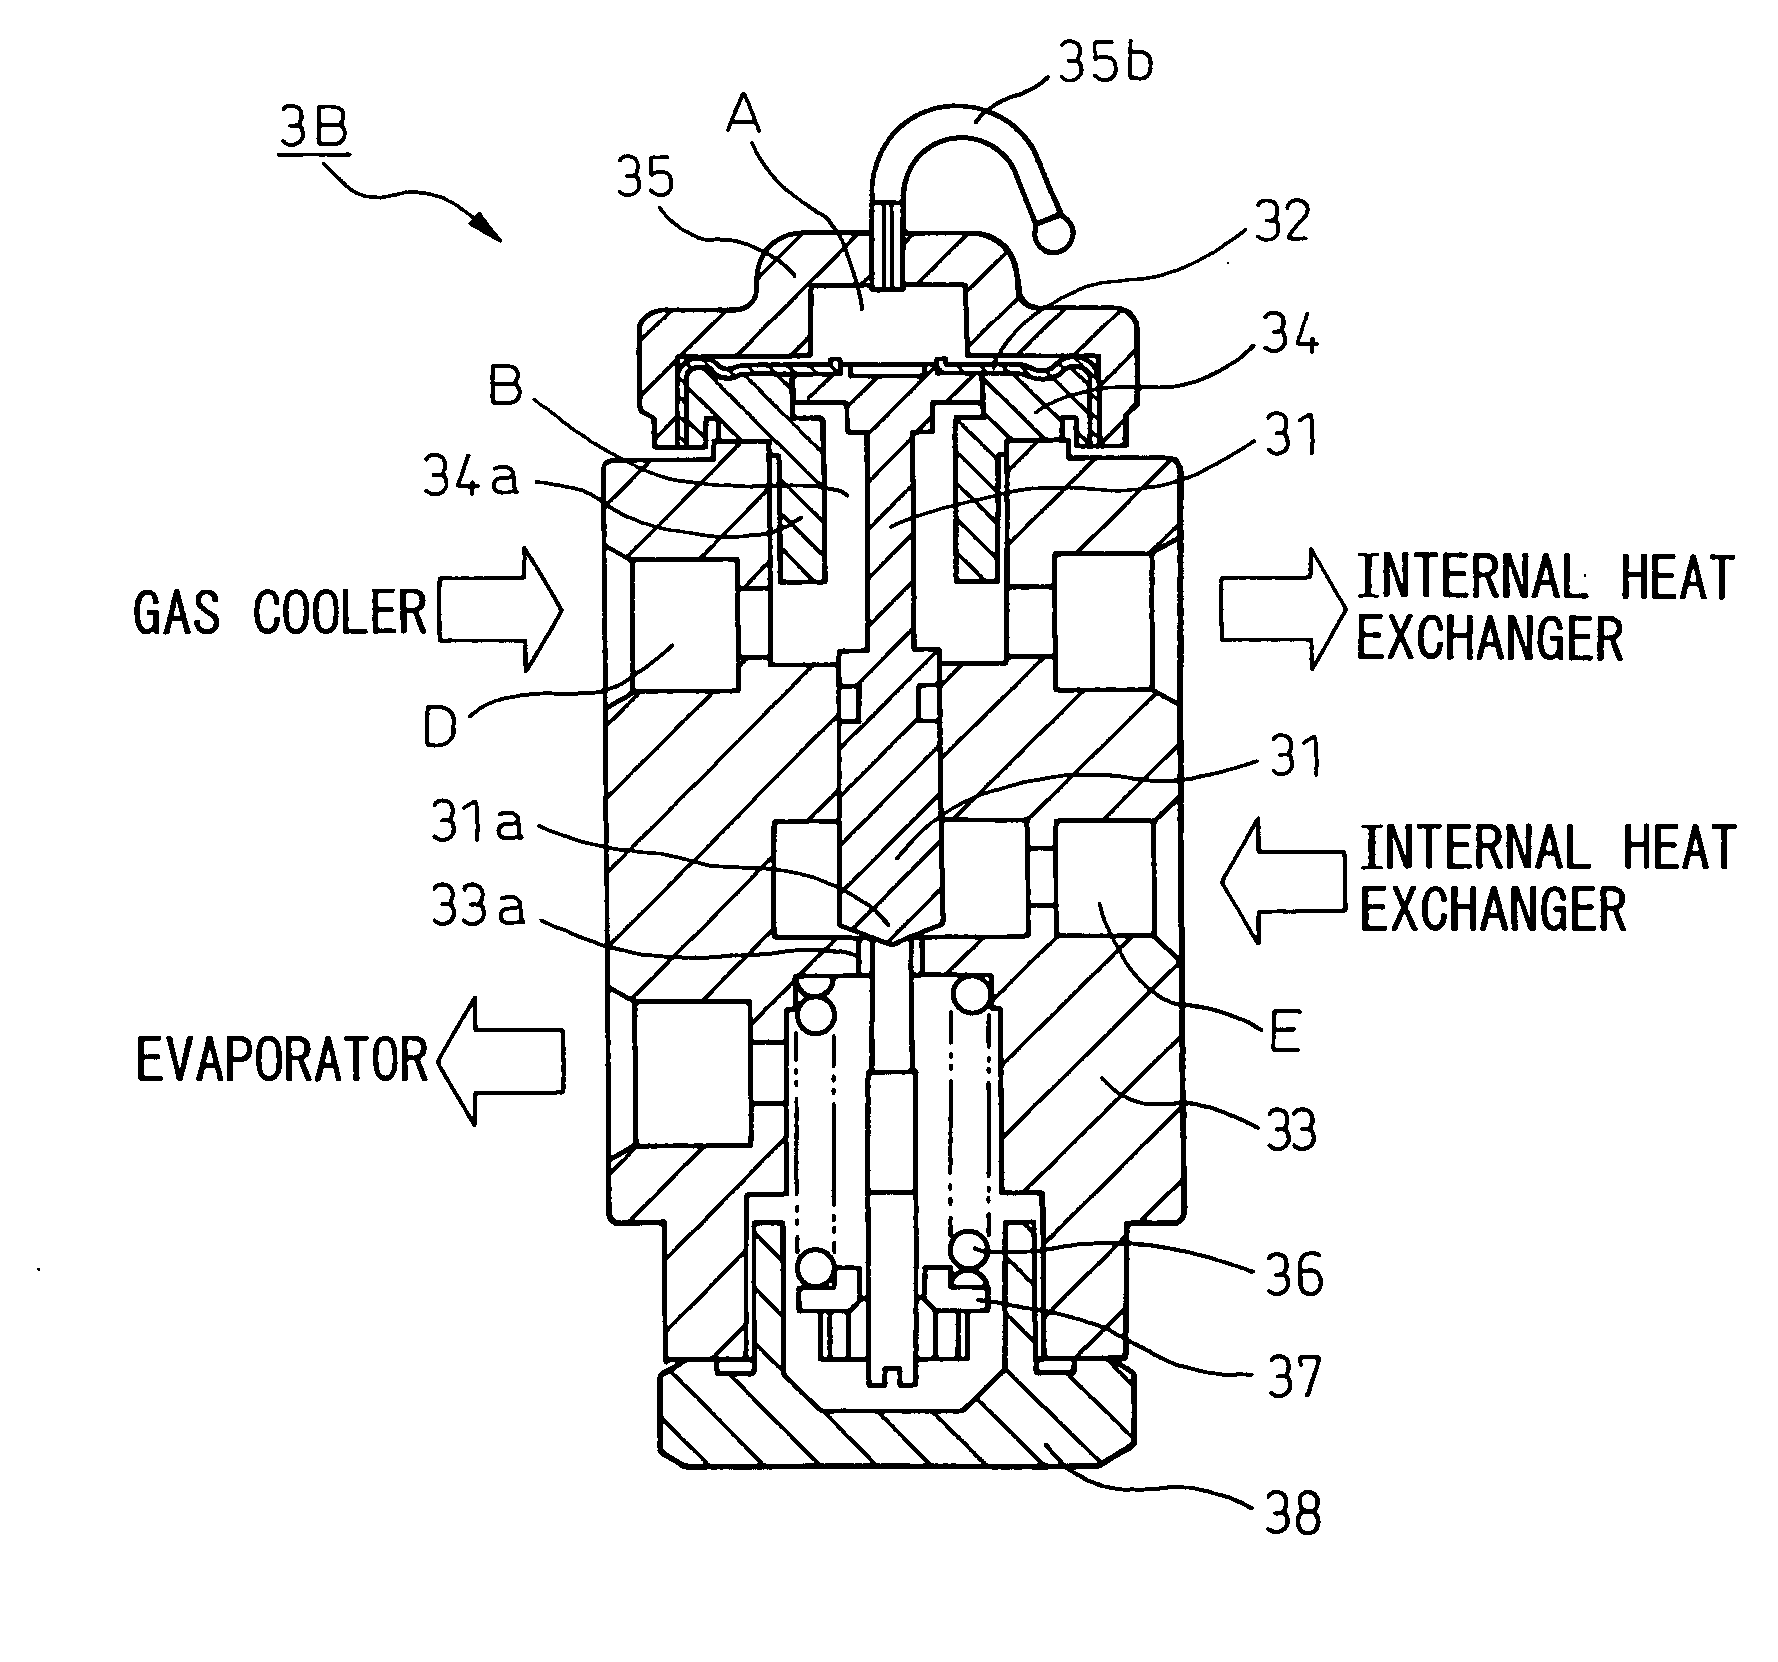 Expansion valve for refrigerating cycle